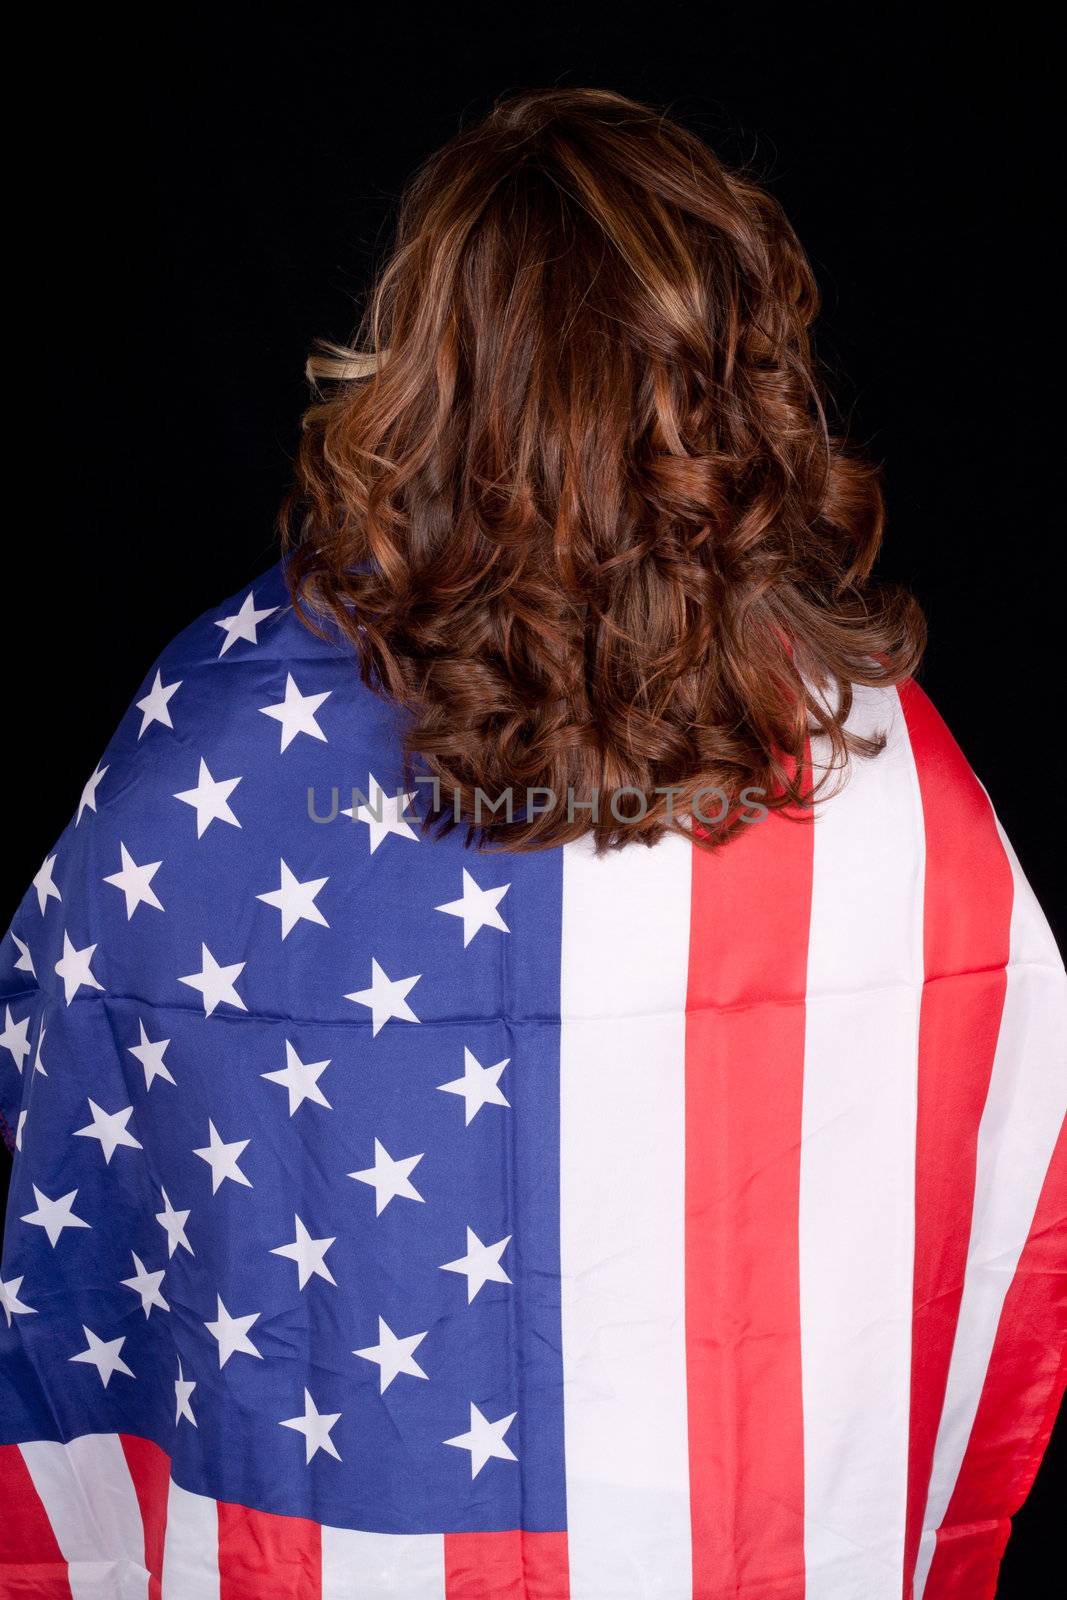 A picture of an American flag hanging from a woman.